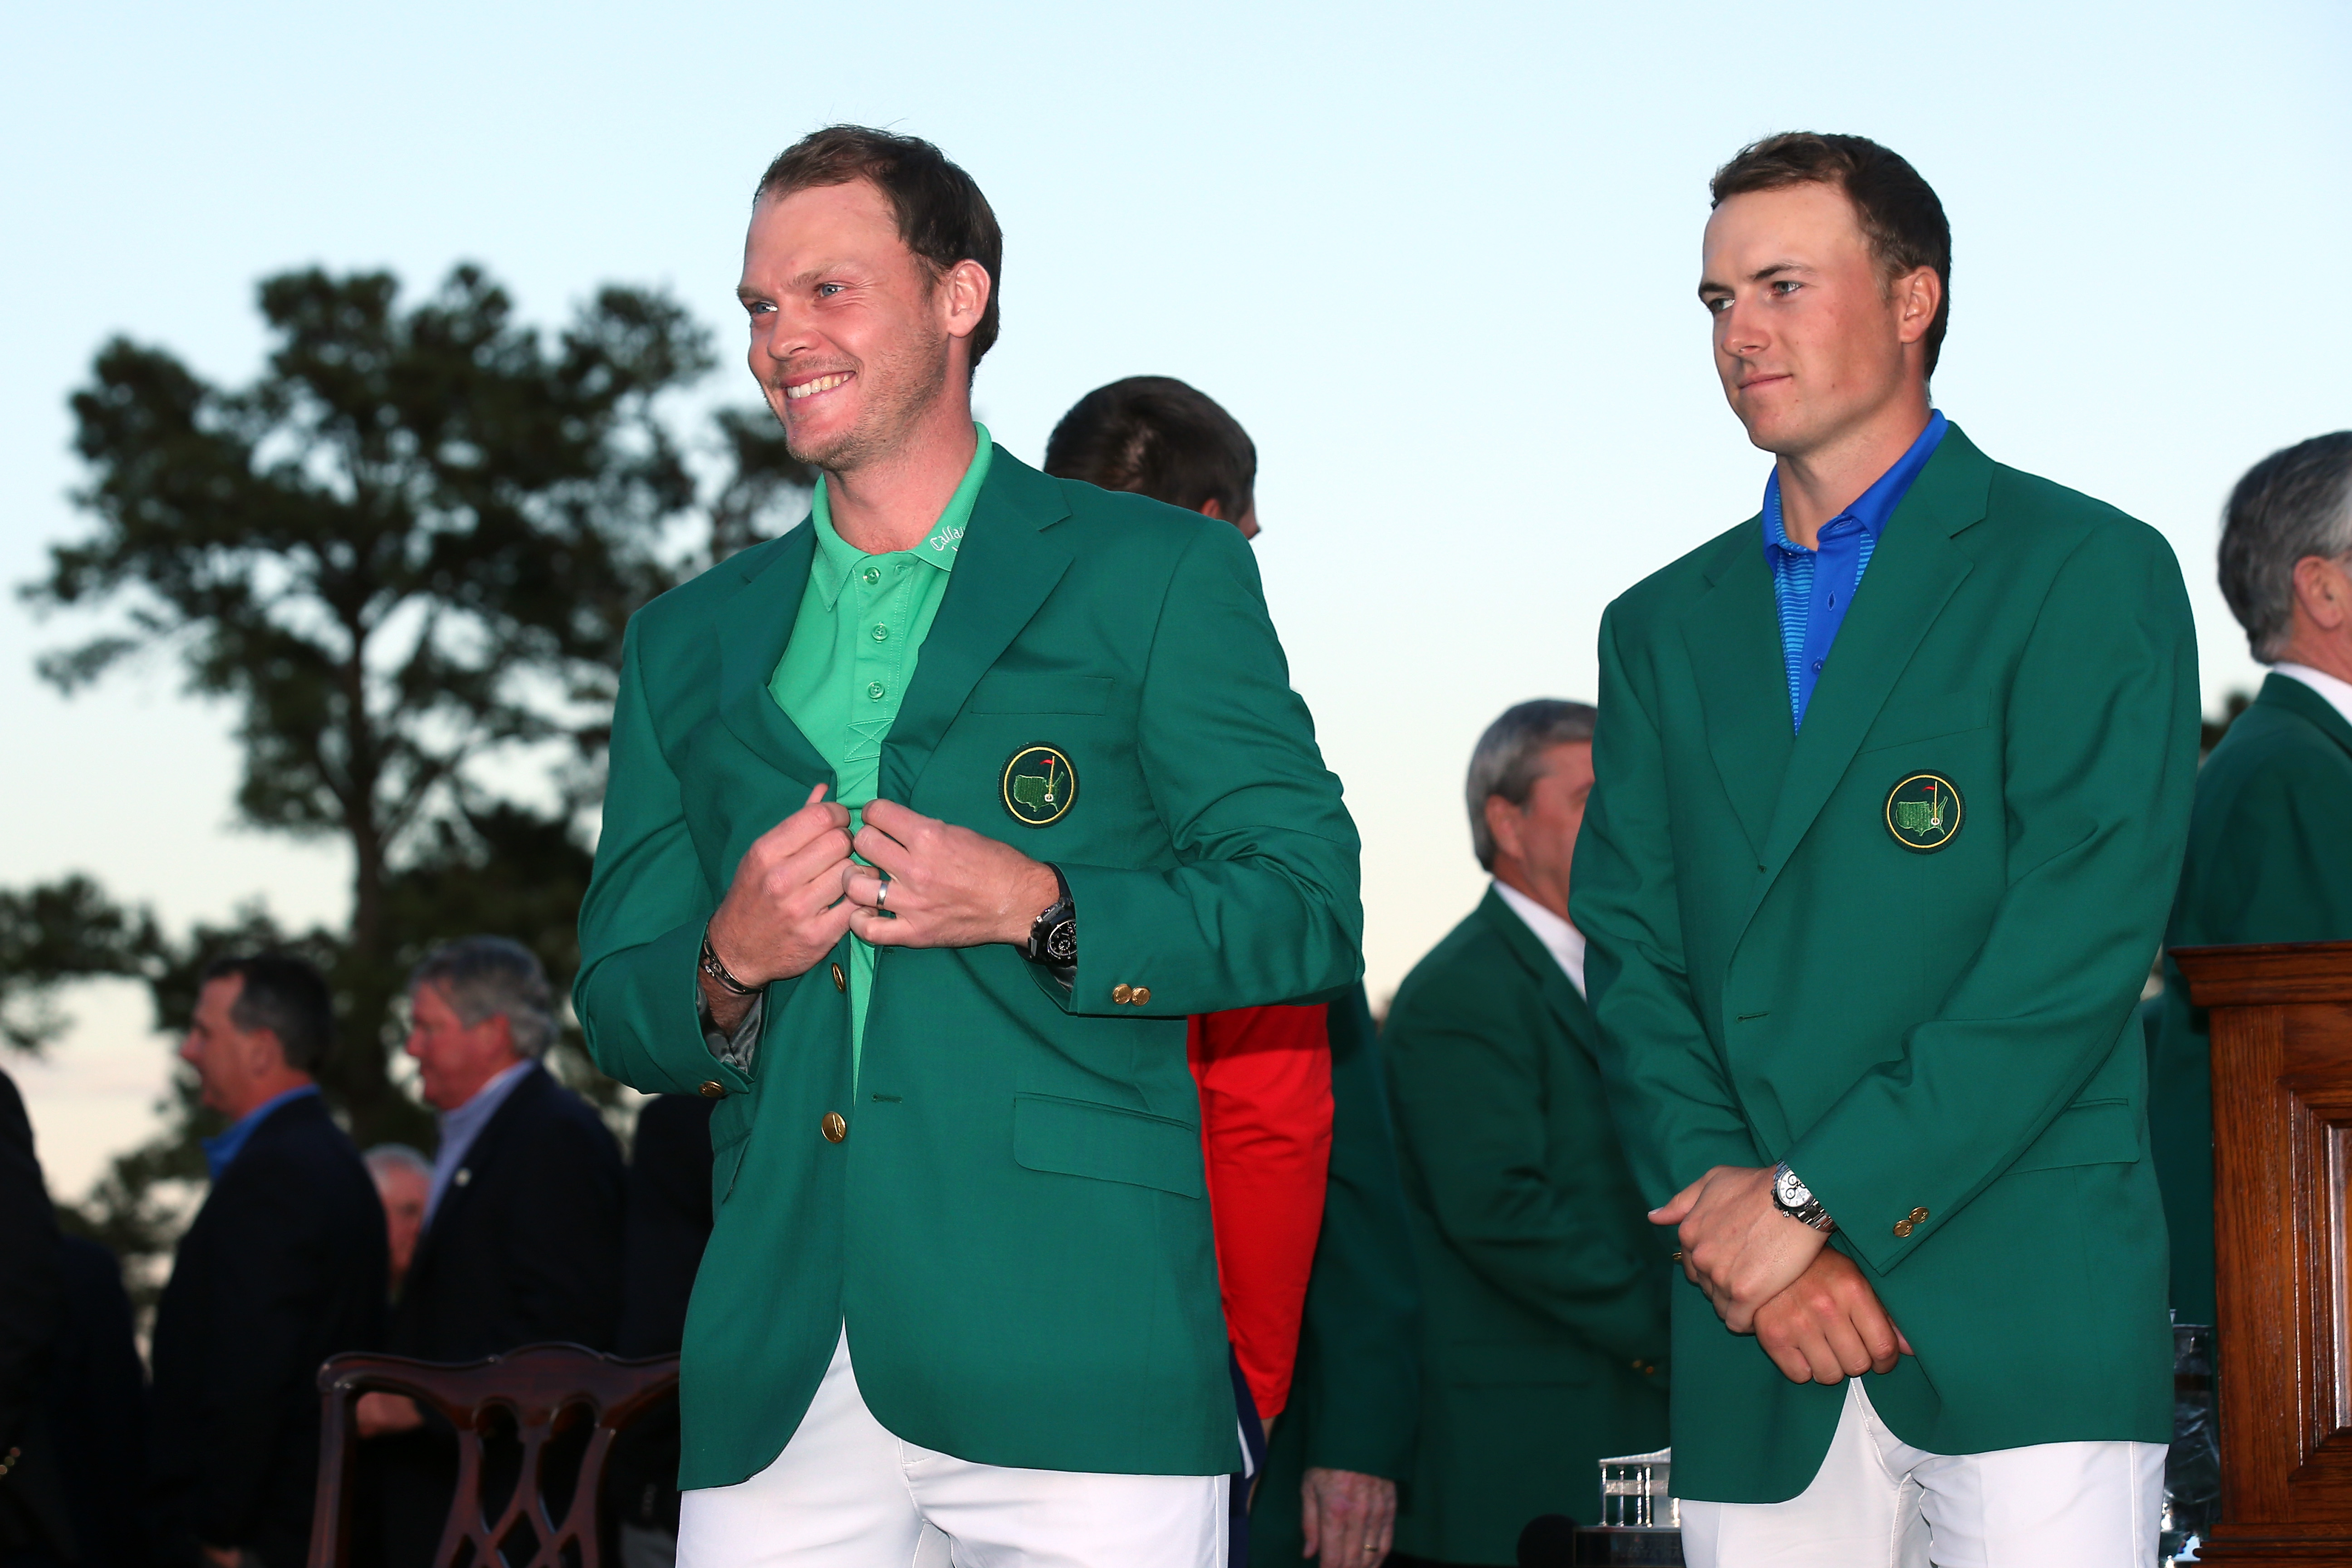 Jordan Spieth quite literally handed Danny Willett the Green Jacket at the 2016 Masters (Getty Images)